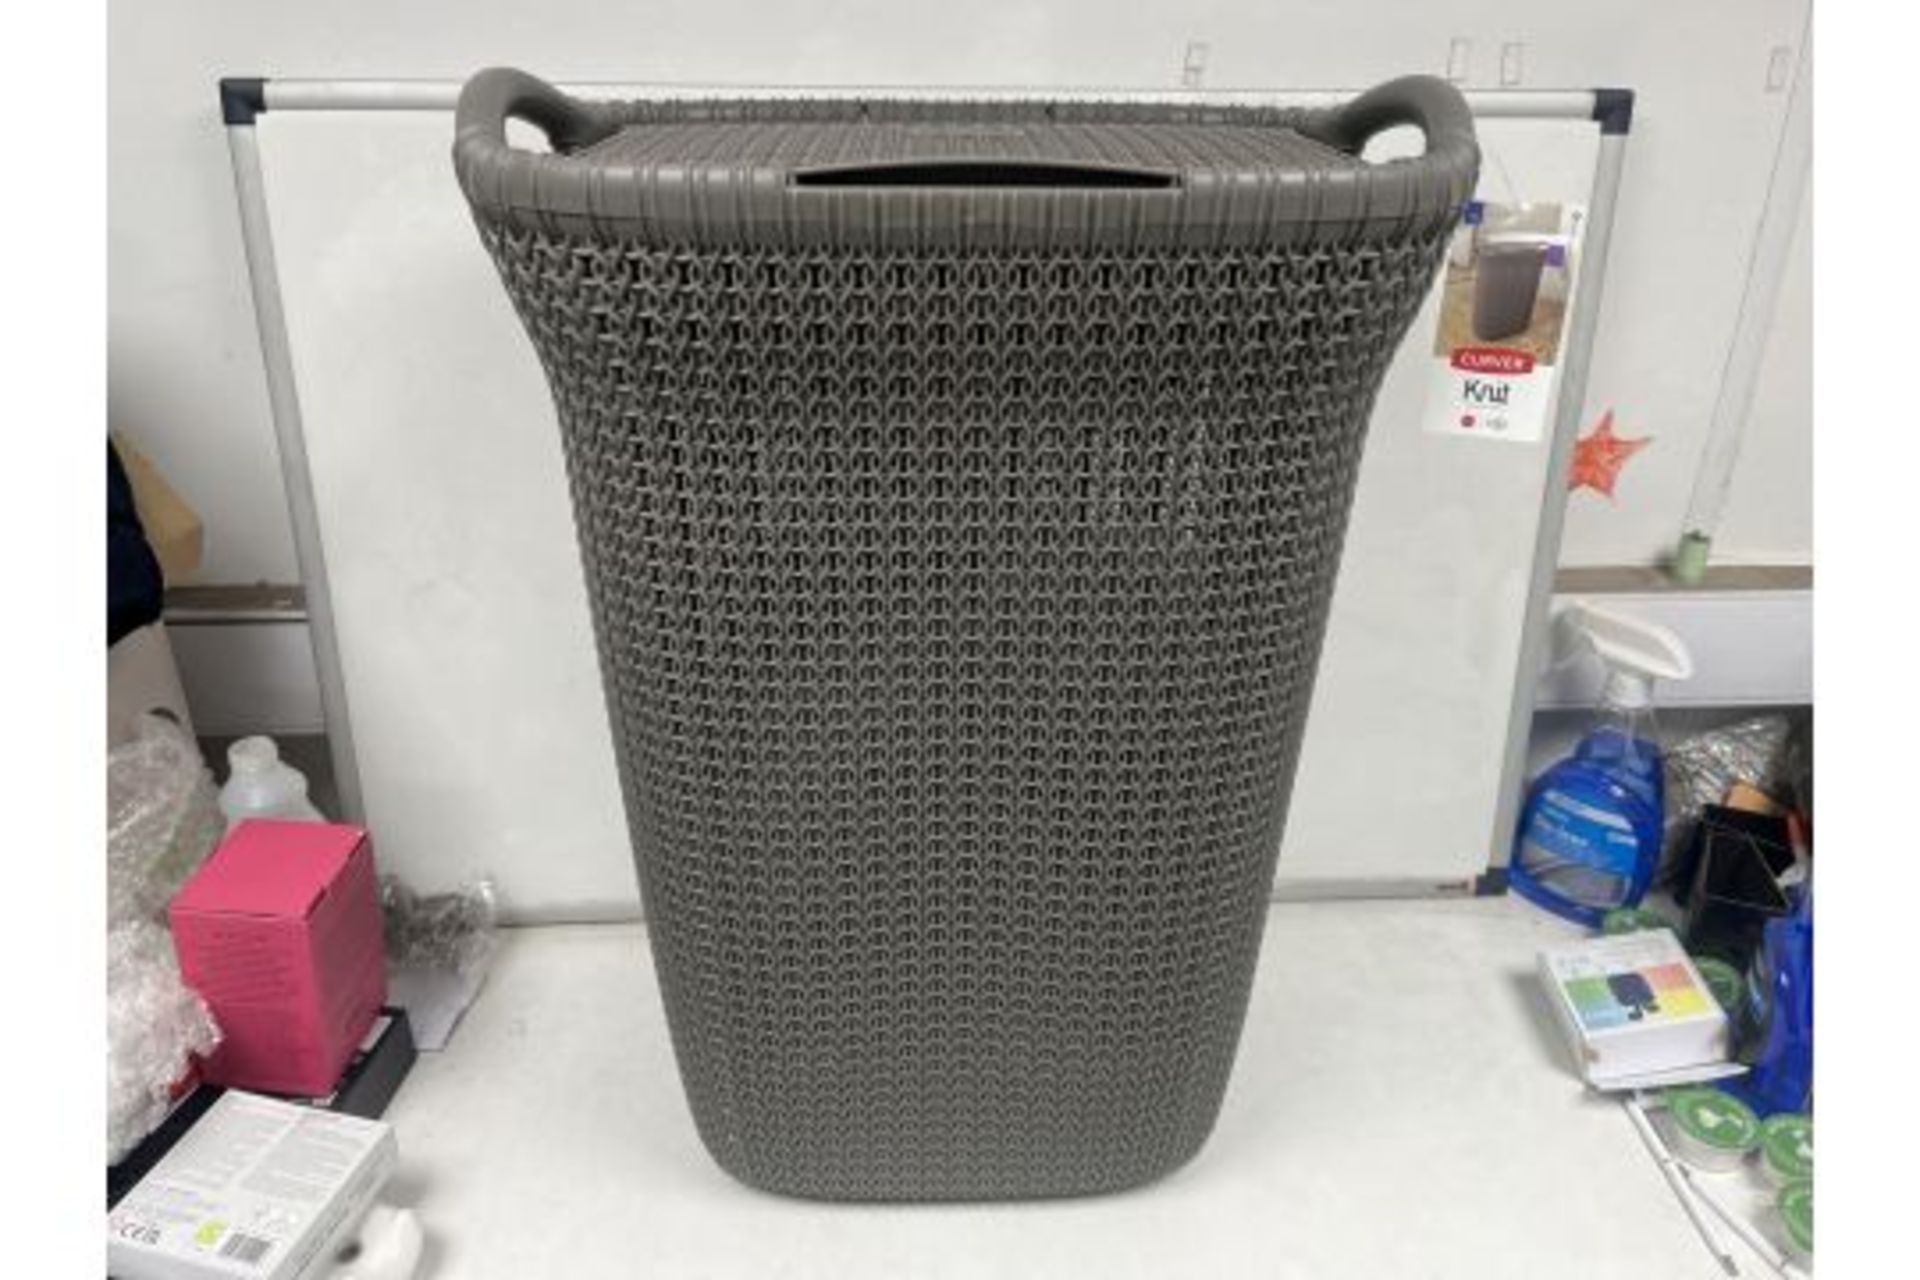 4 X NEW PACKAGED CURVER KNIT LAUNDRY BASKETS. (229823ROW9)